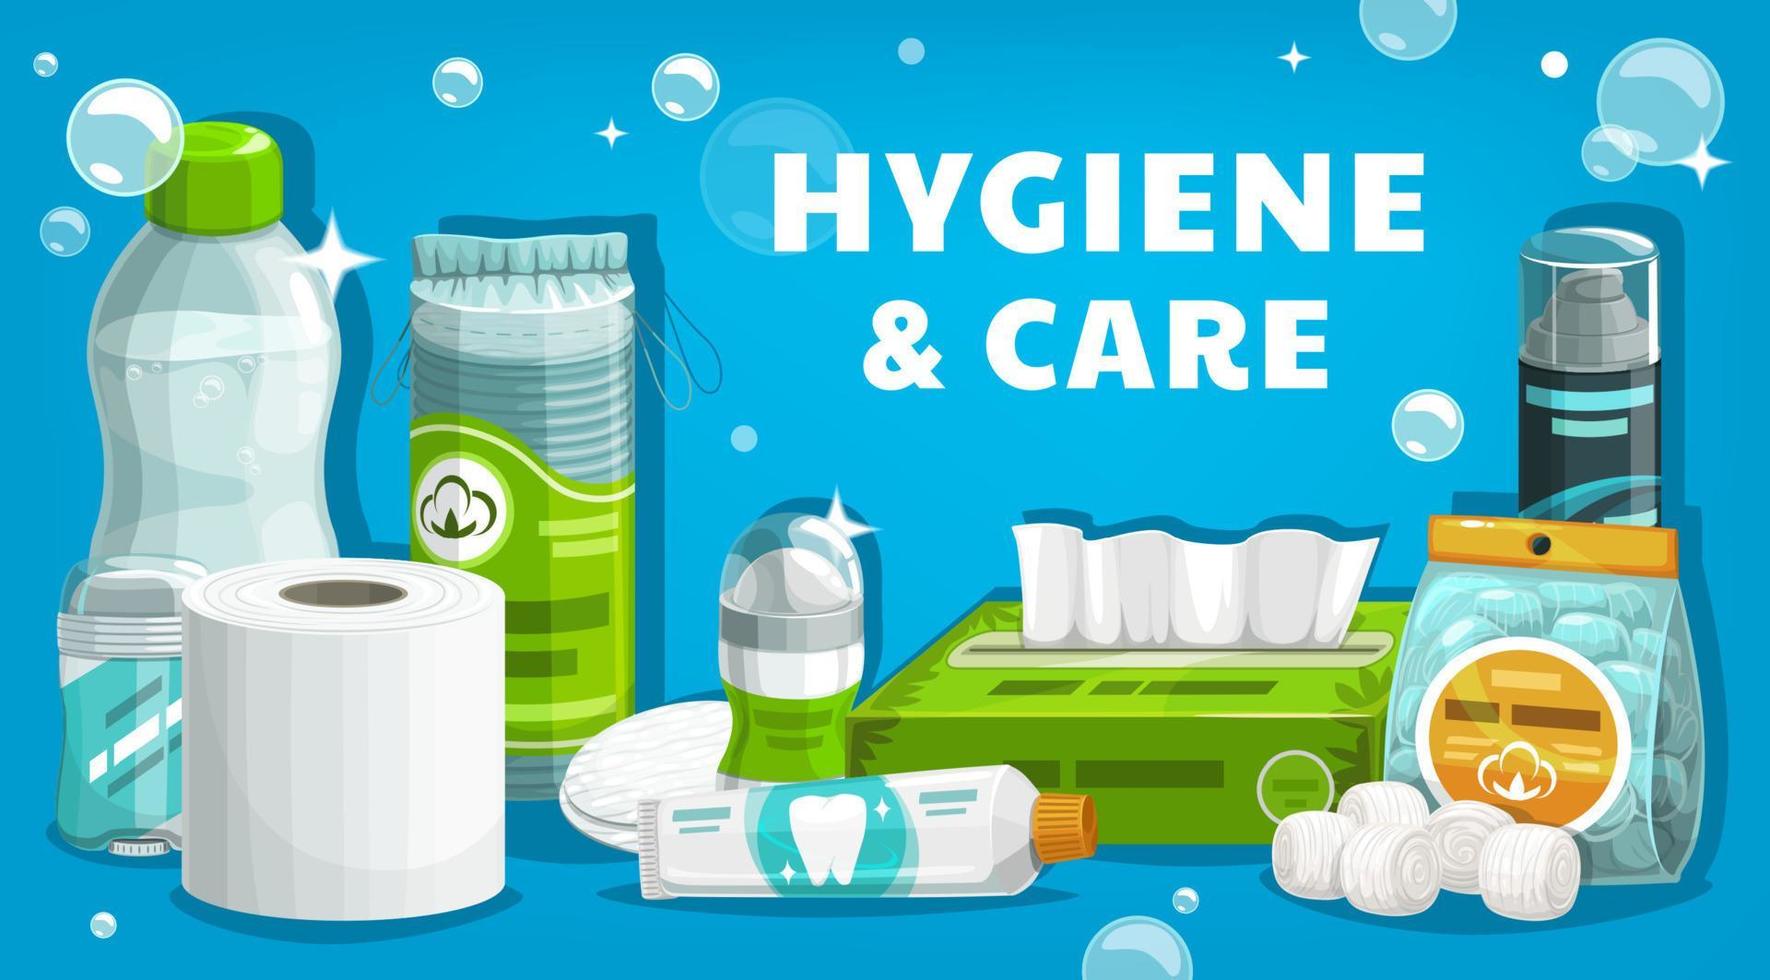 Daily hygiene, personal health care product poster vector